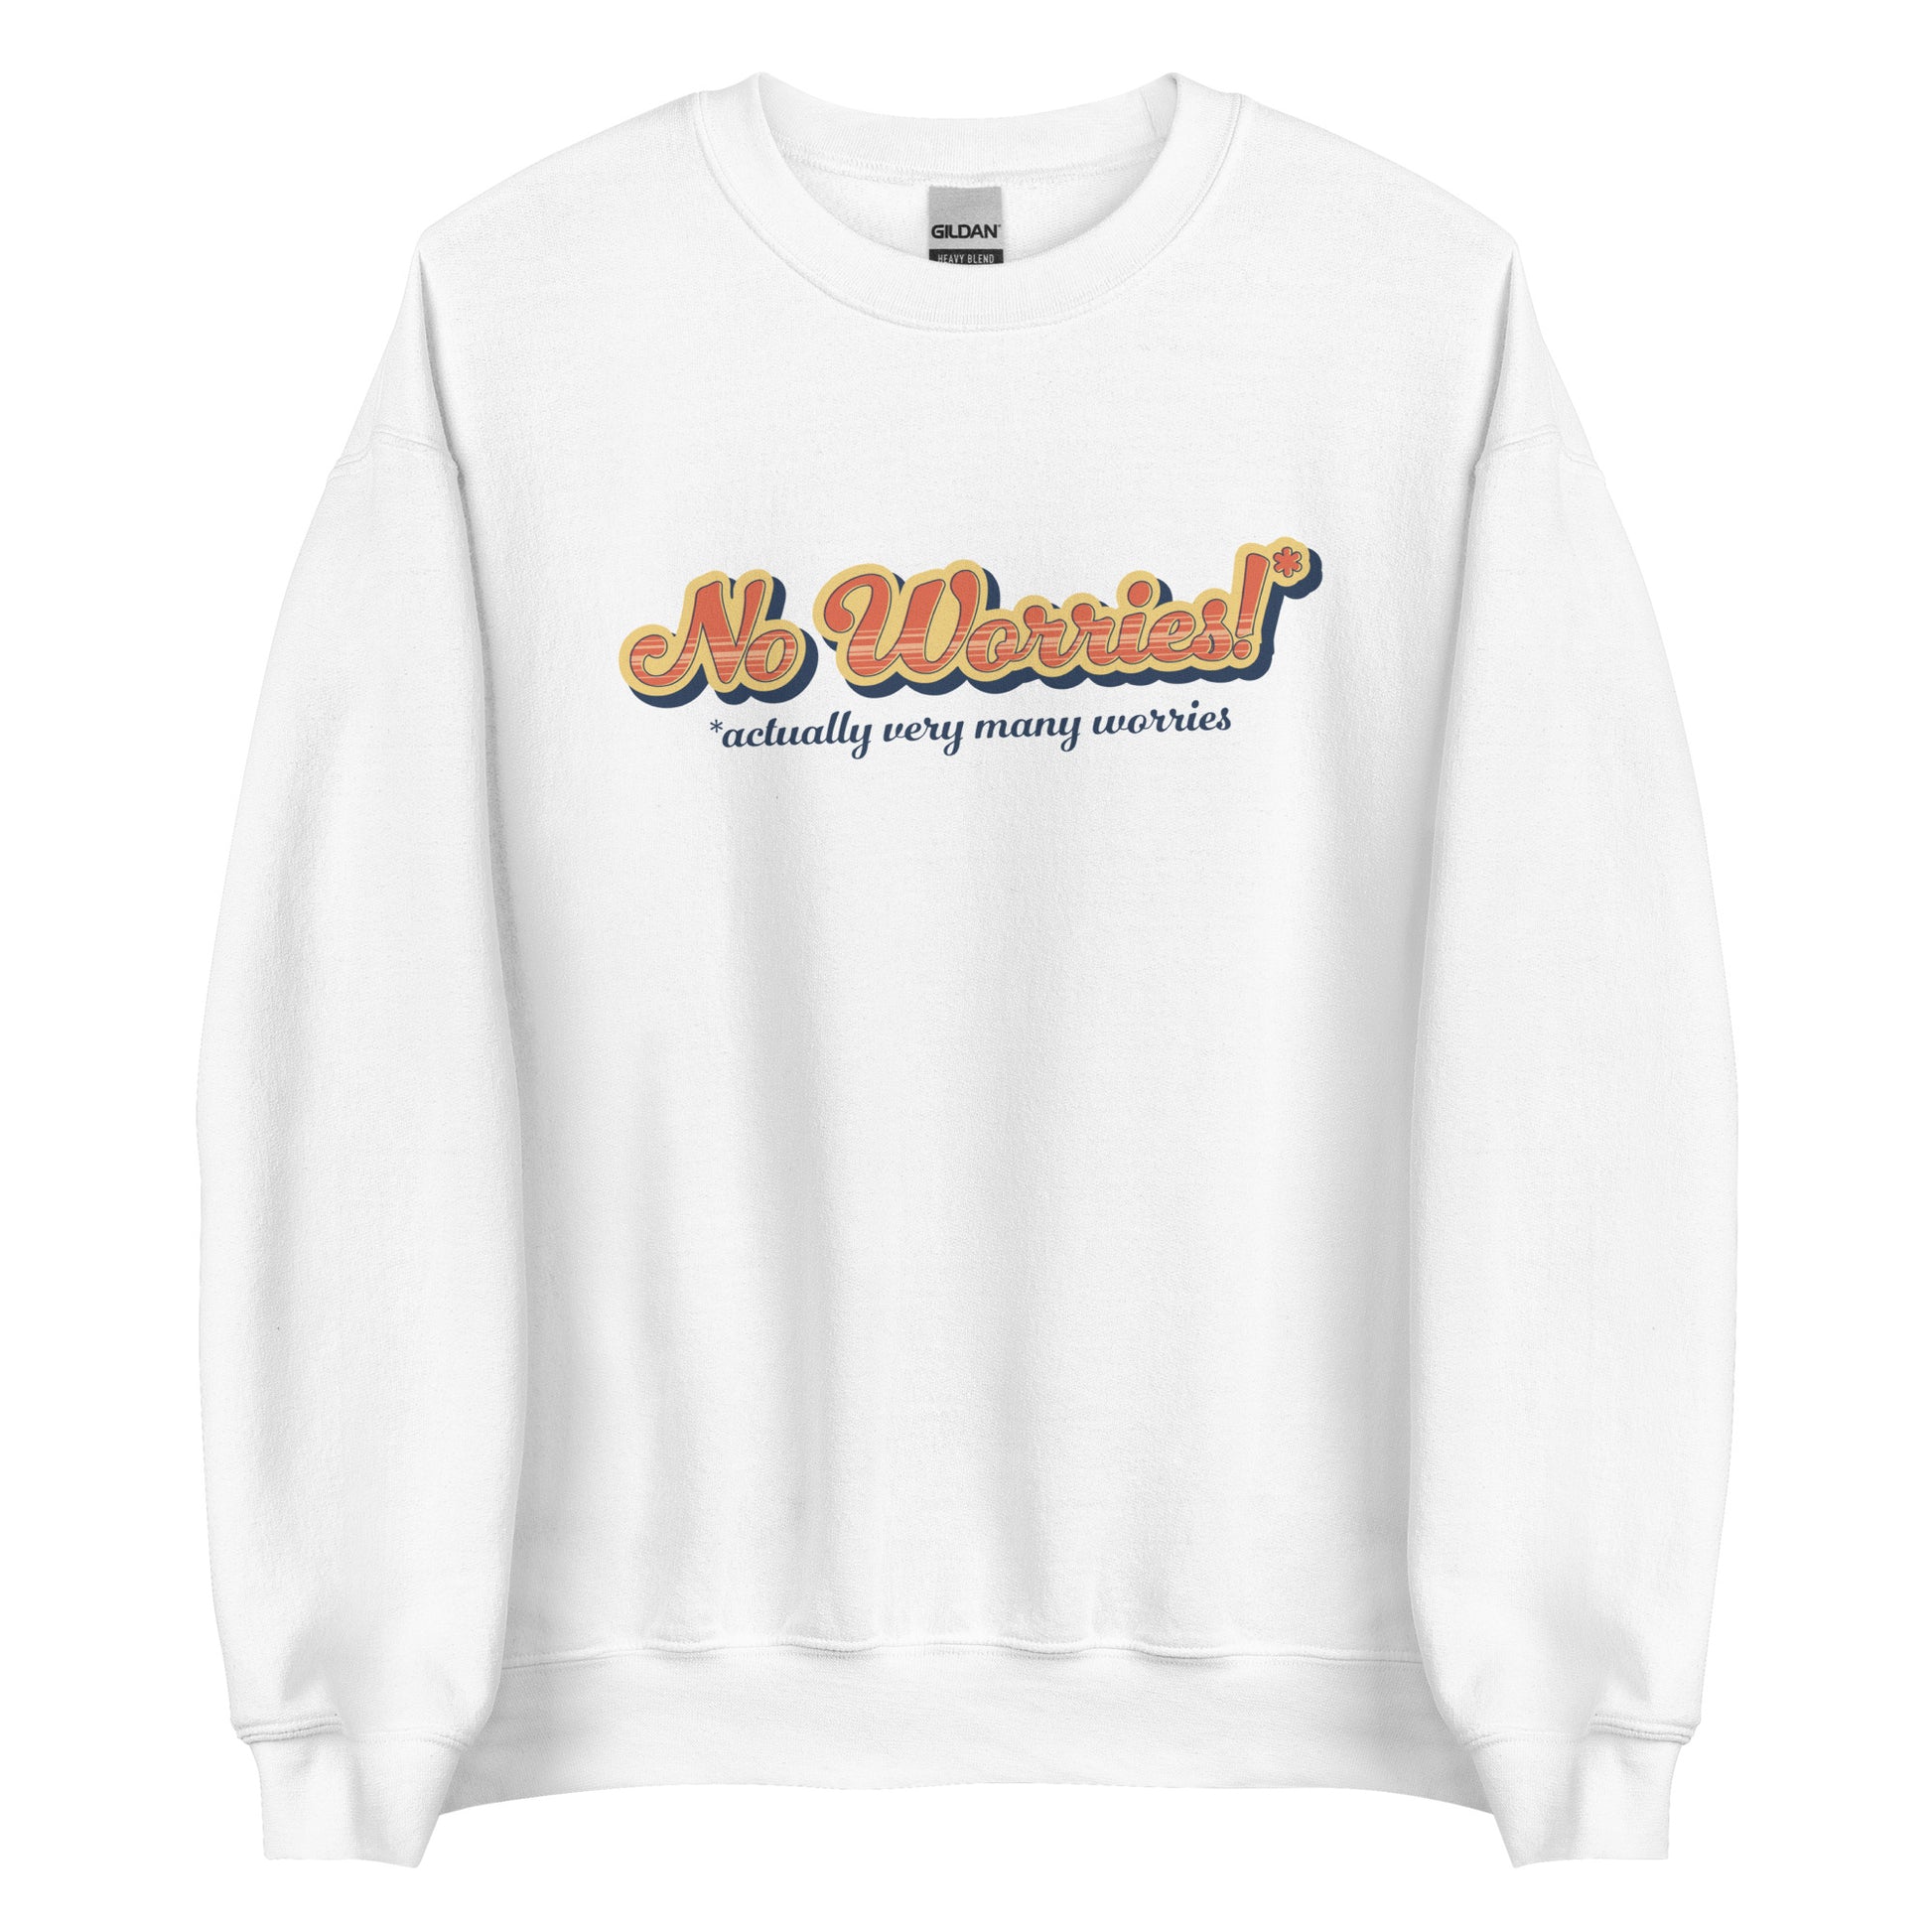 A white crewneck sweatshirt featuring vintage-style text that reads "No worries!* *actually very many worries"